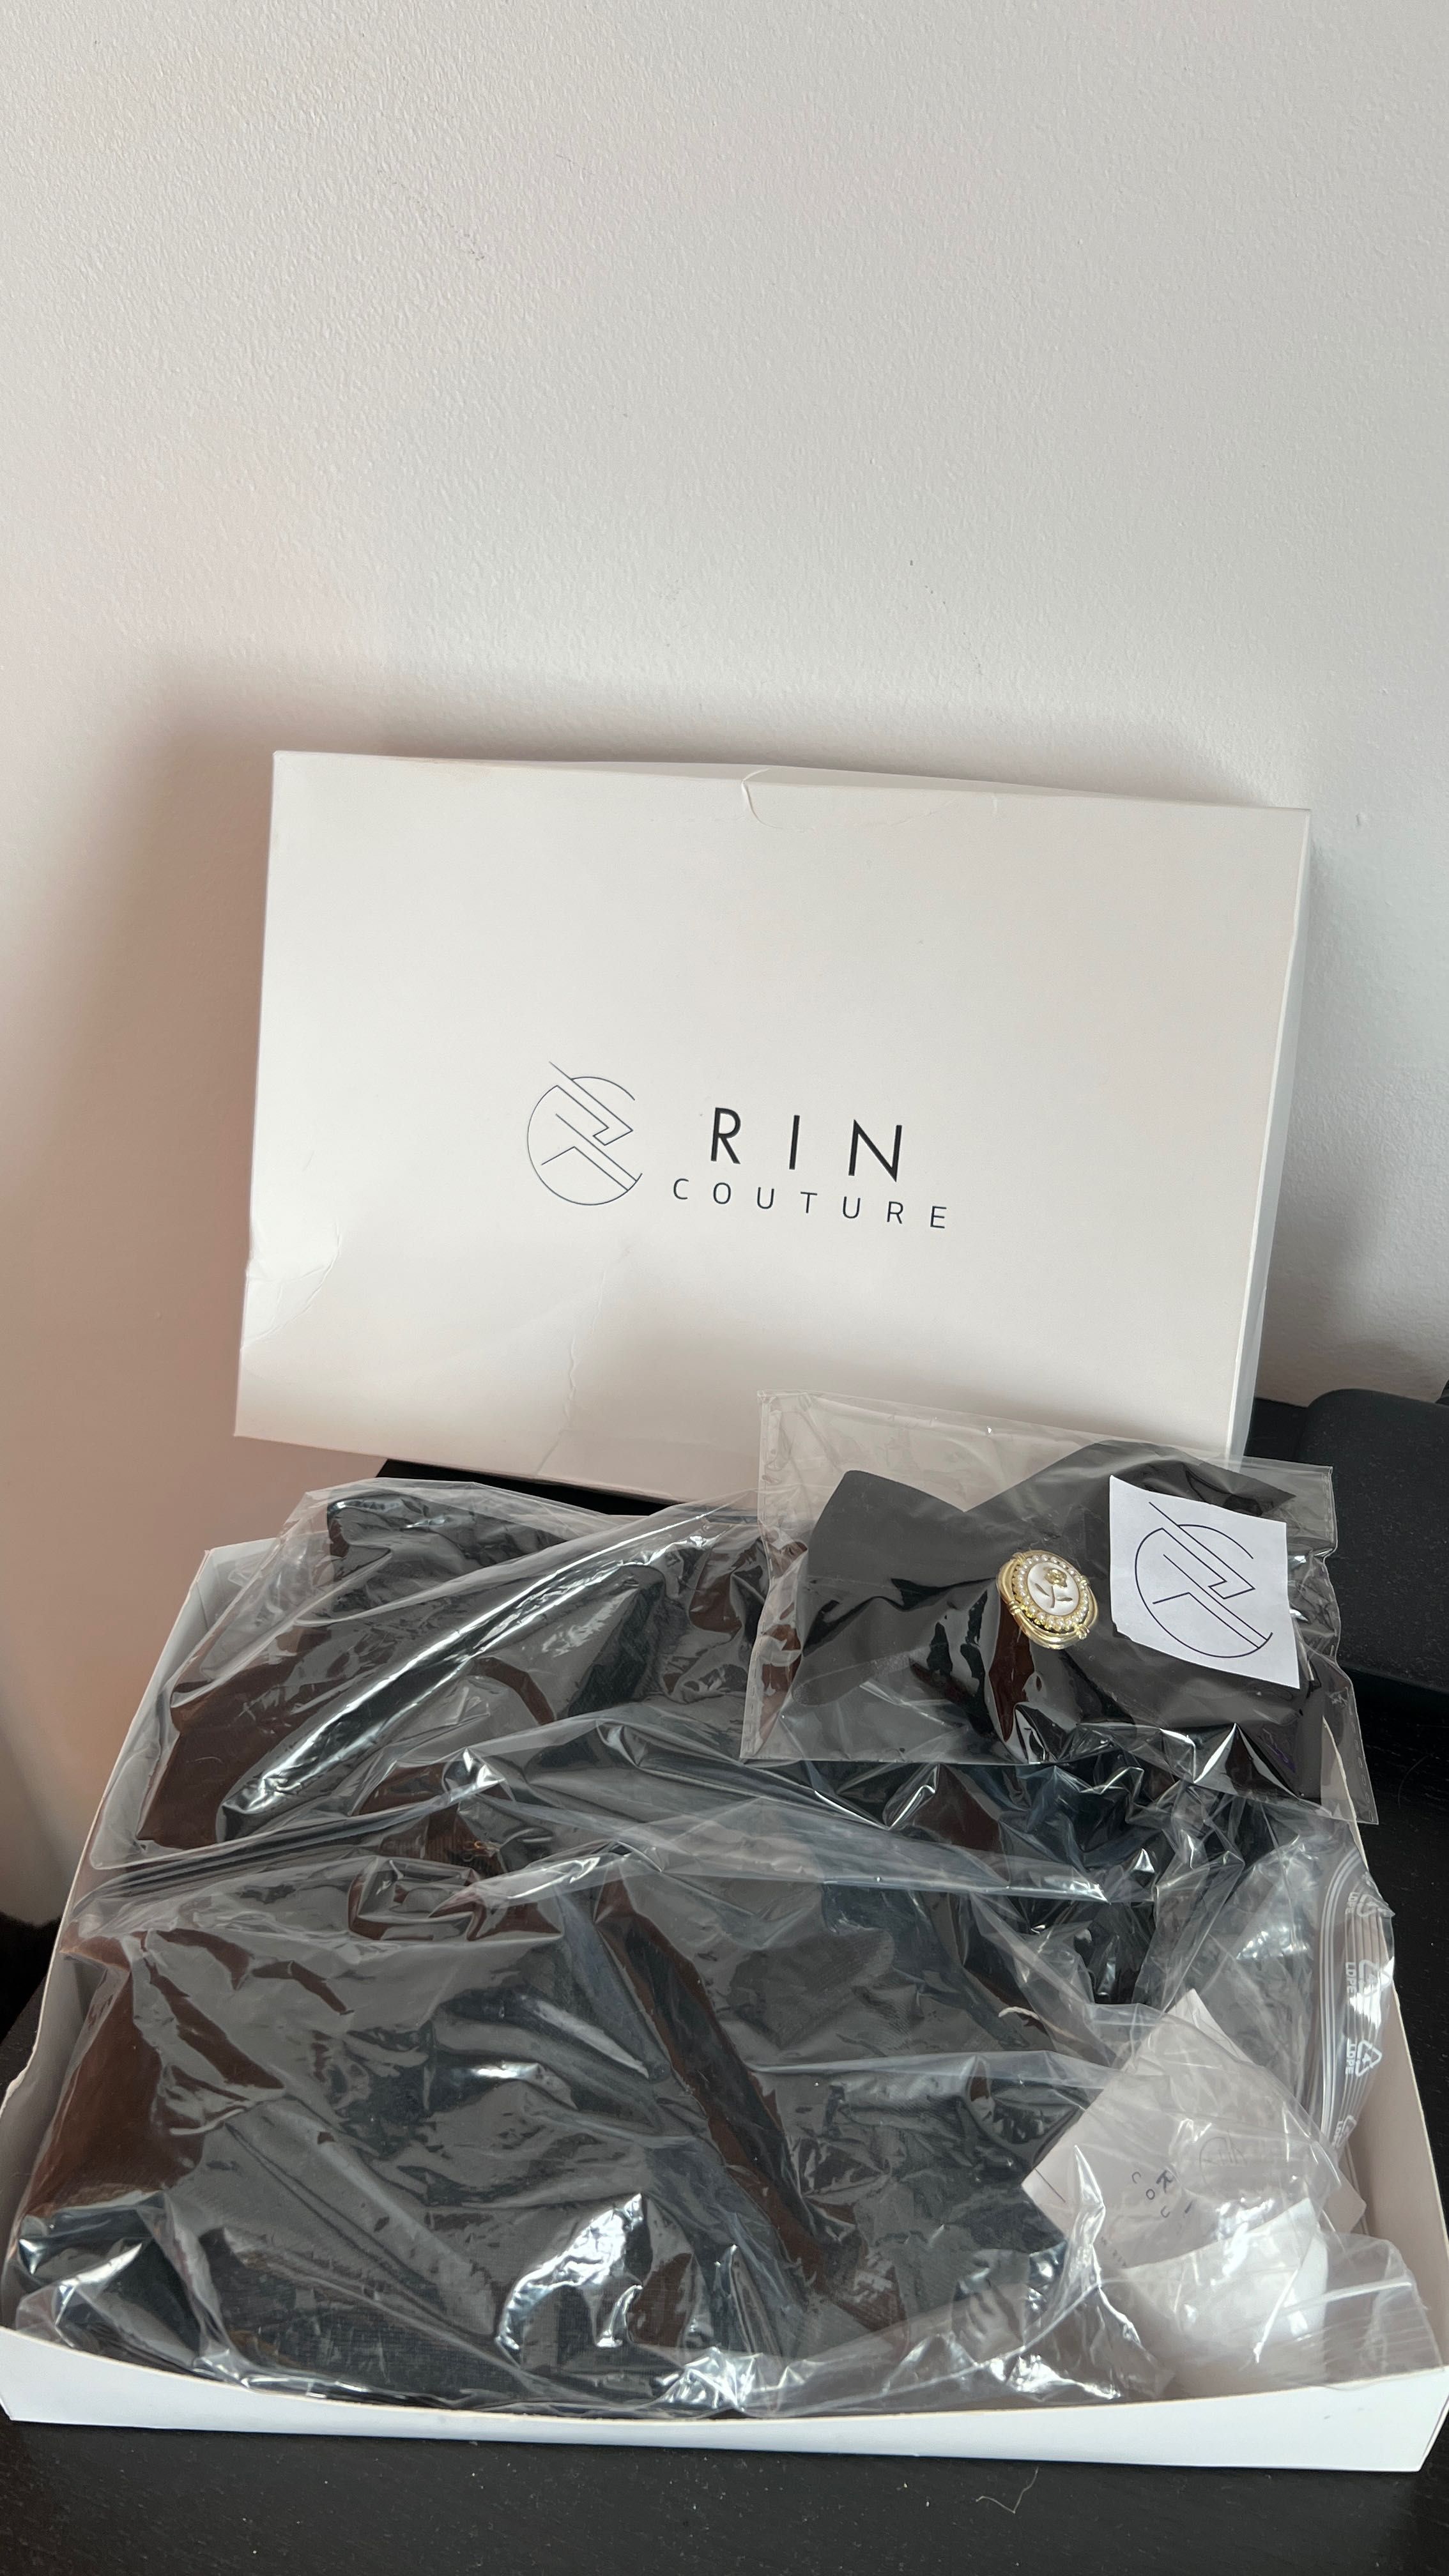 Vând rochie Rin couture